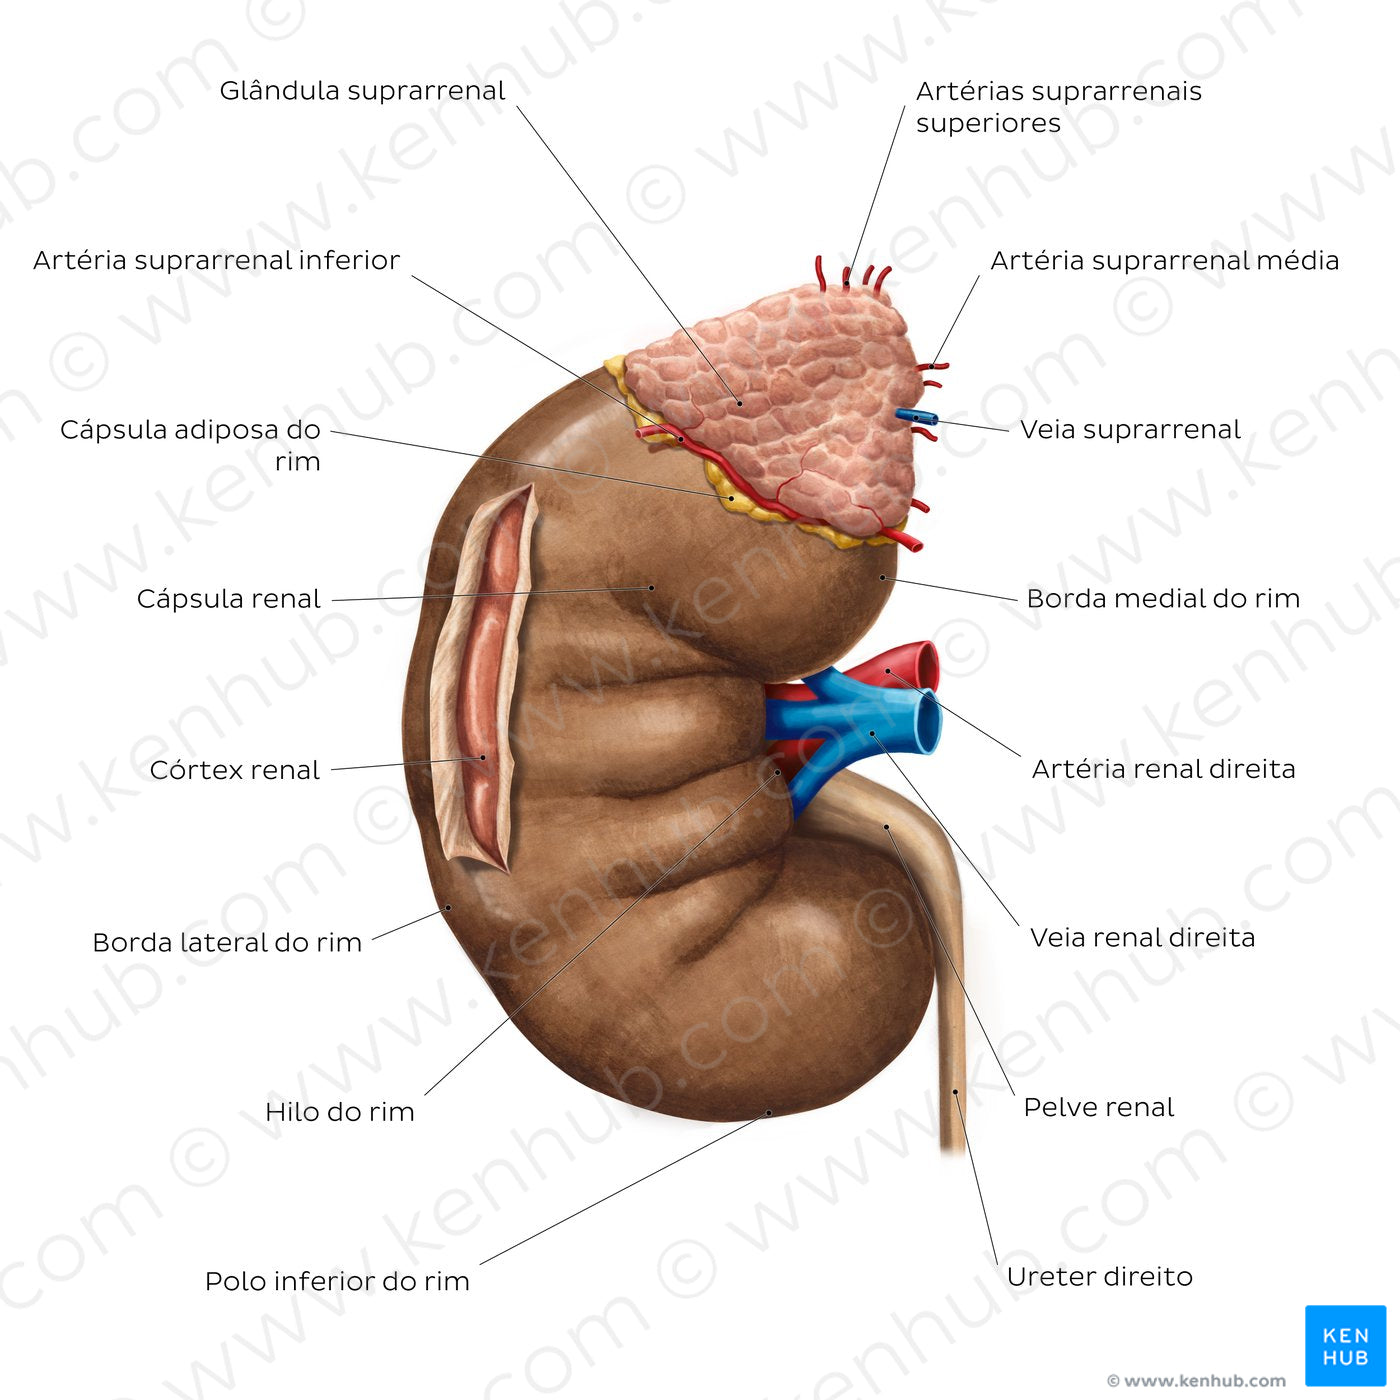 Overview of the kidney (Portuguese)